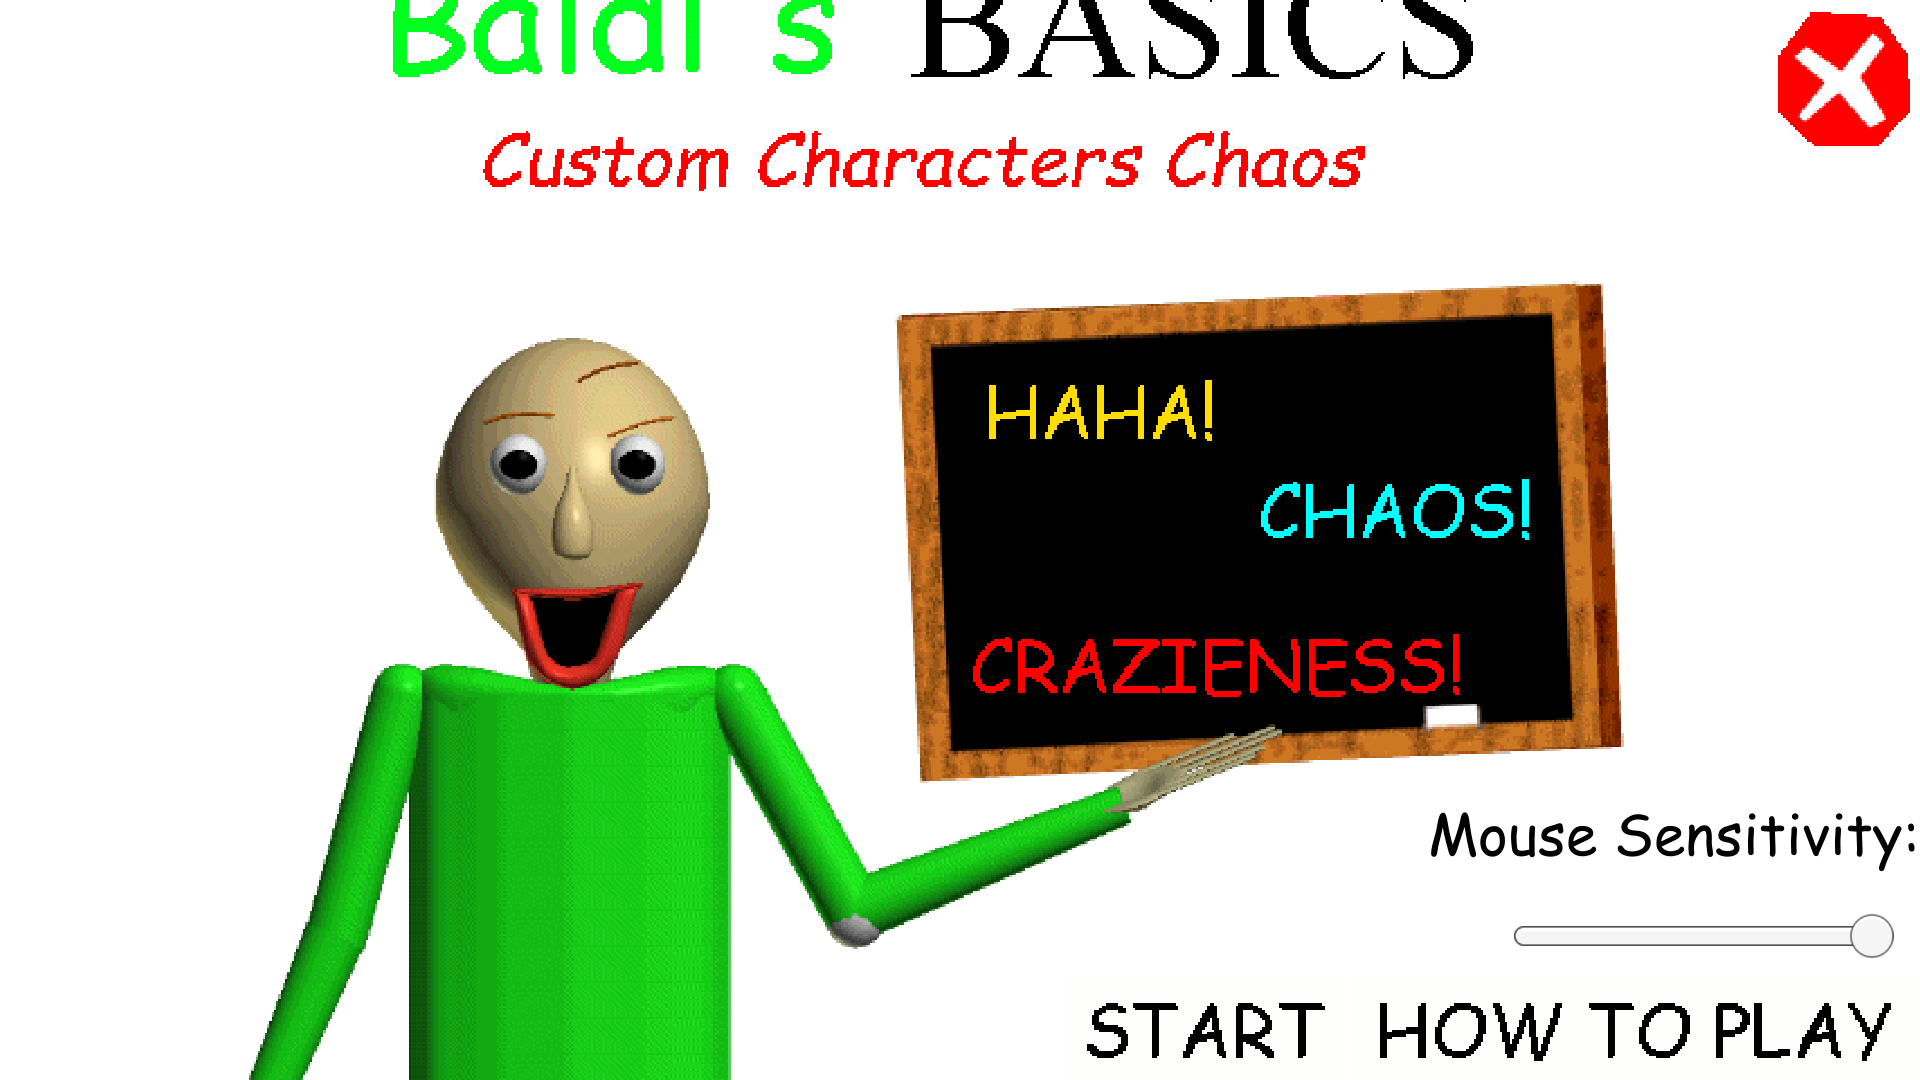 Baldi's Basics Custom Character Chaos! - free porn game download, adult  nsfw games for free 